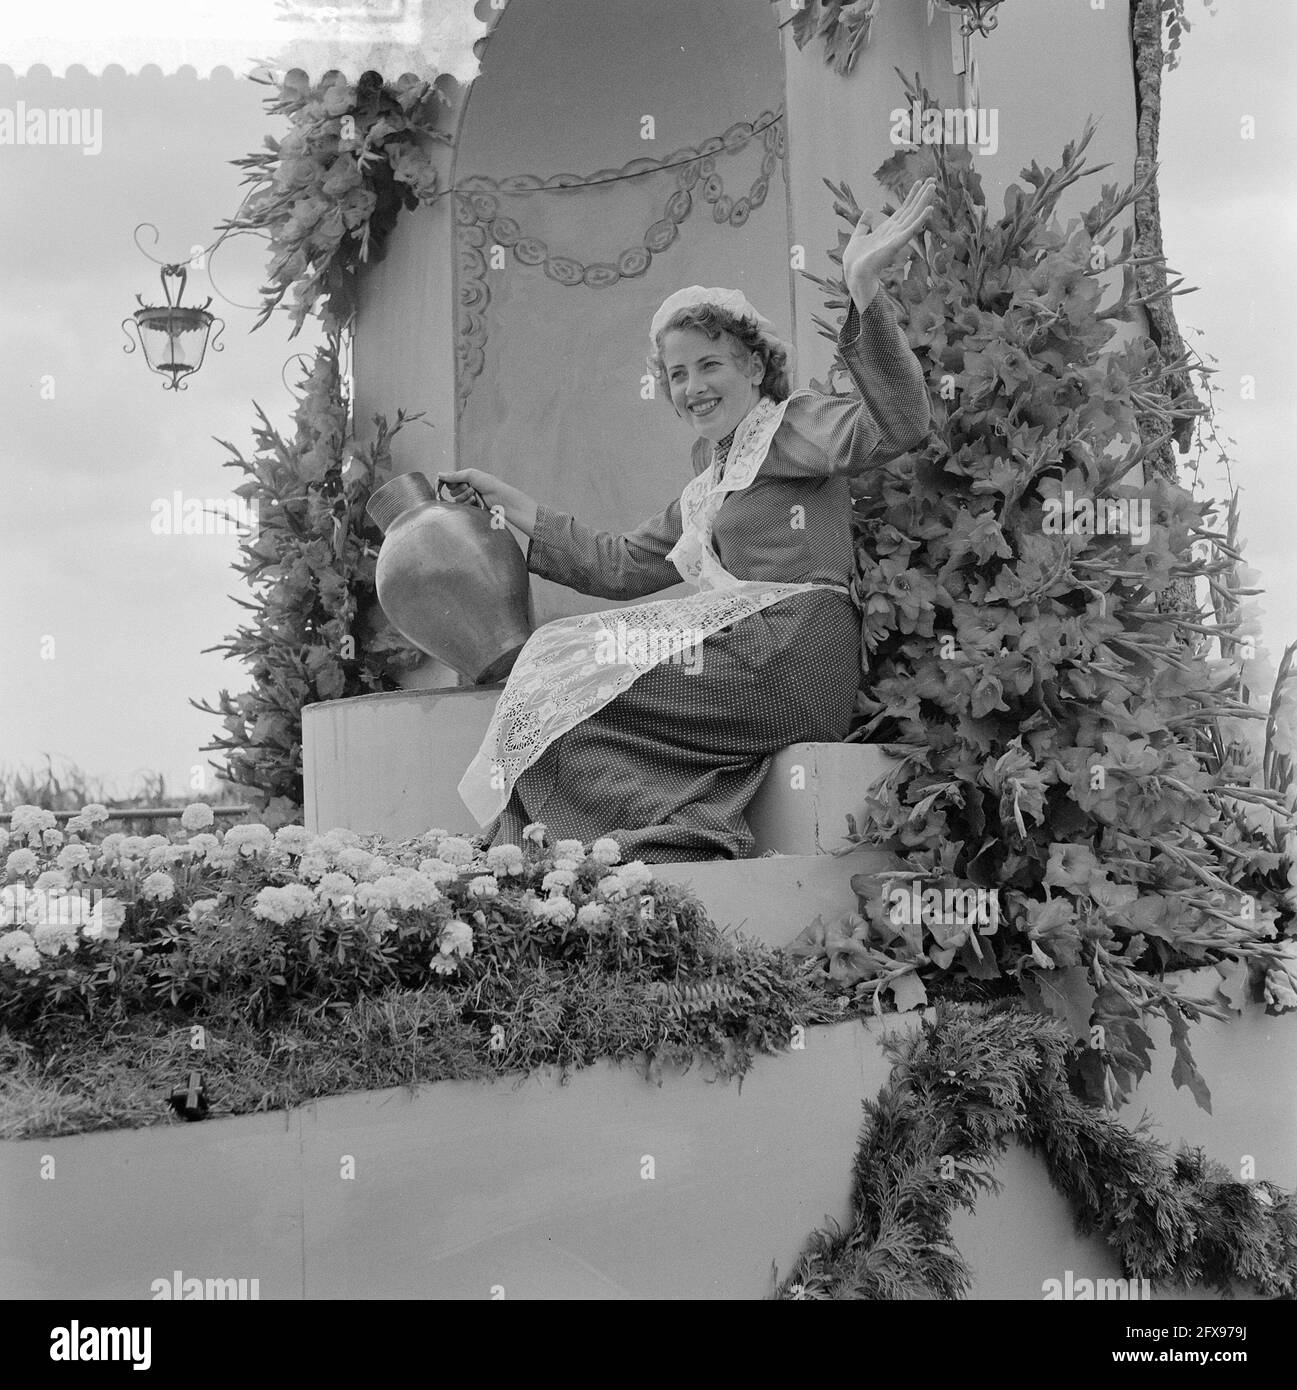 Flower parade at Rijnsburg, August 3, 1957, BLOEMENCORSO, The Netherlands, 20th century press agency photo, news to remember, documentary, historic photography 1945-1990, visual stories, human history of the Twentieth Century, capturing moments in time Stock Photo